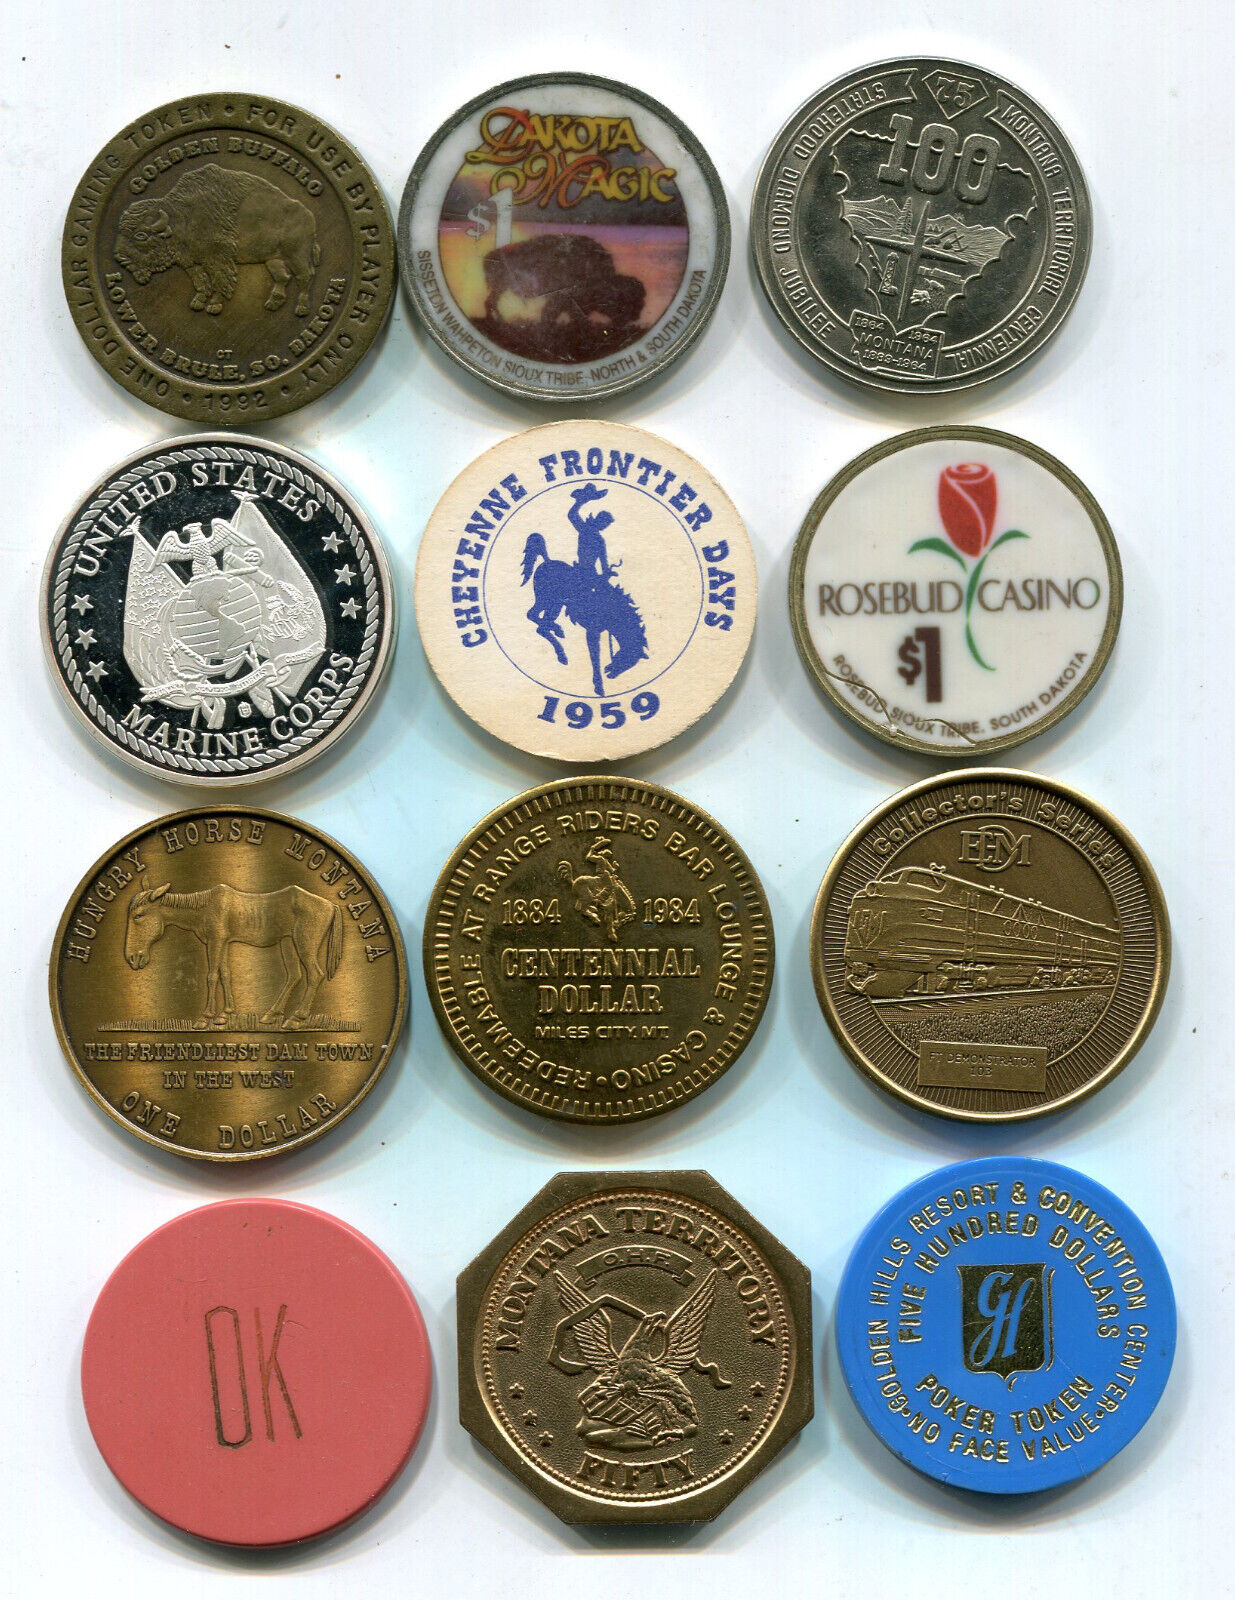 Tokens - Misc - and - Deadwood, South Dakota - 12 of them - Chips